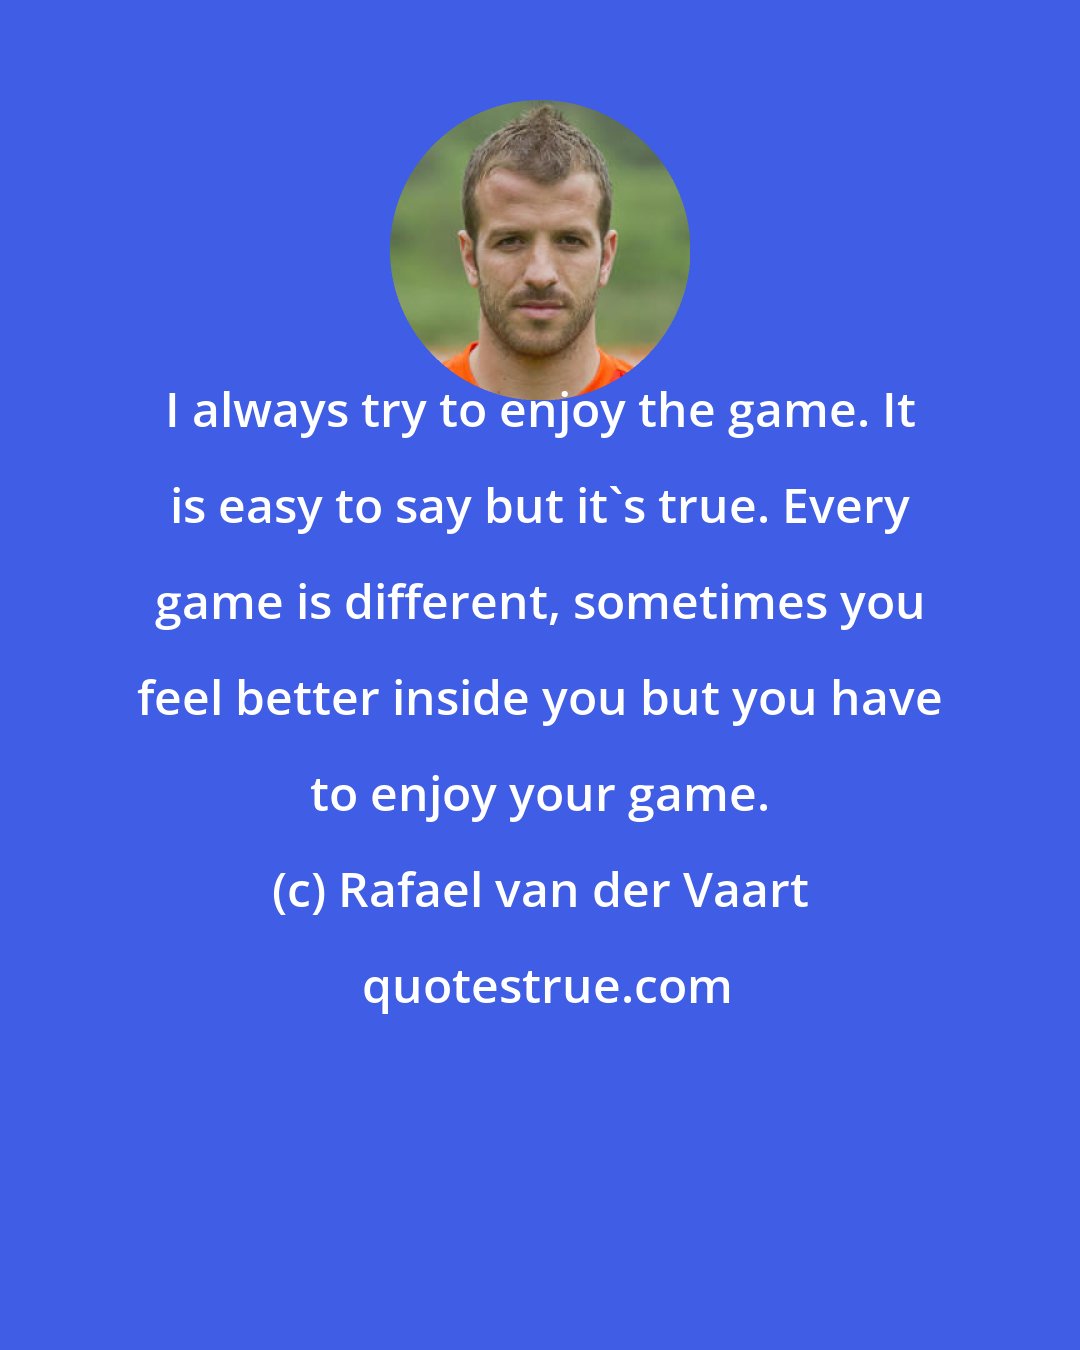 Rafael van der Vaart: I always try to enjoy the game. It is easy to say but it's true. Every game is different, sometimes you feel better inside you but you have to enjoy your game.